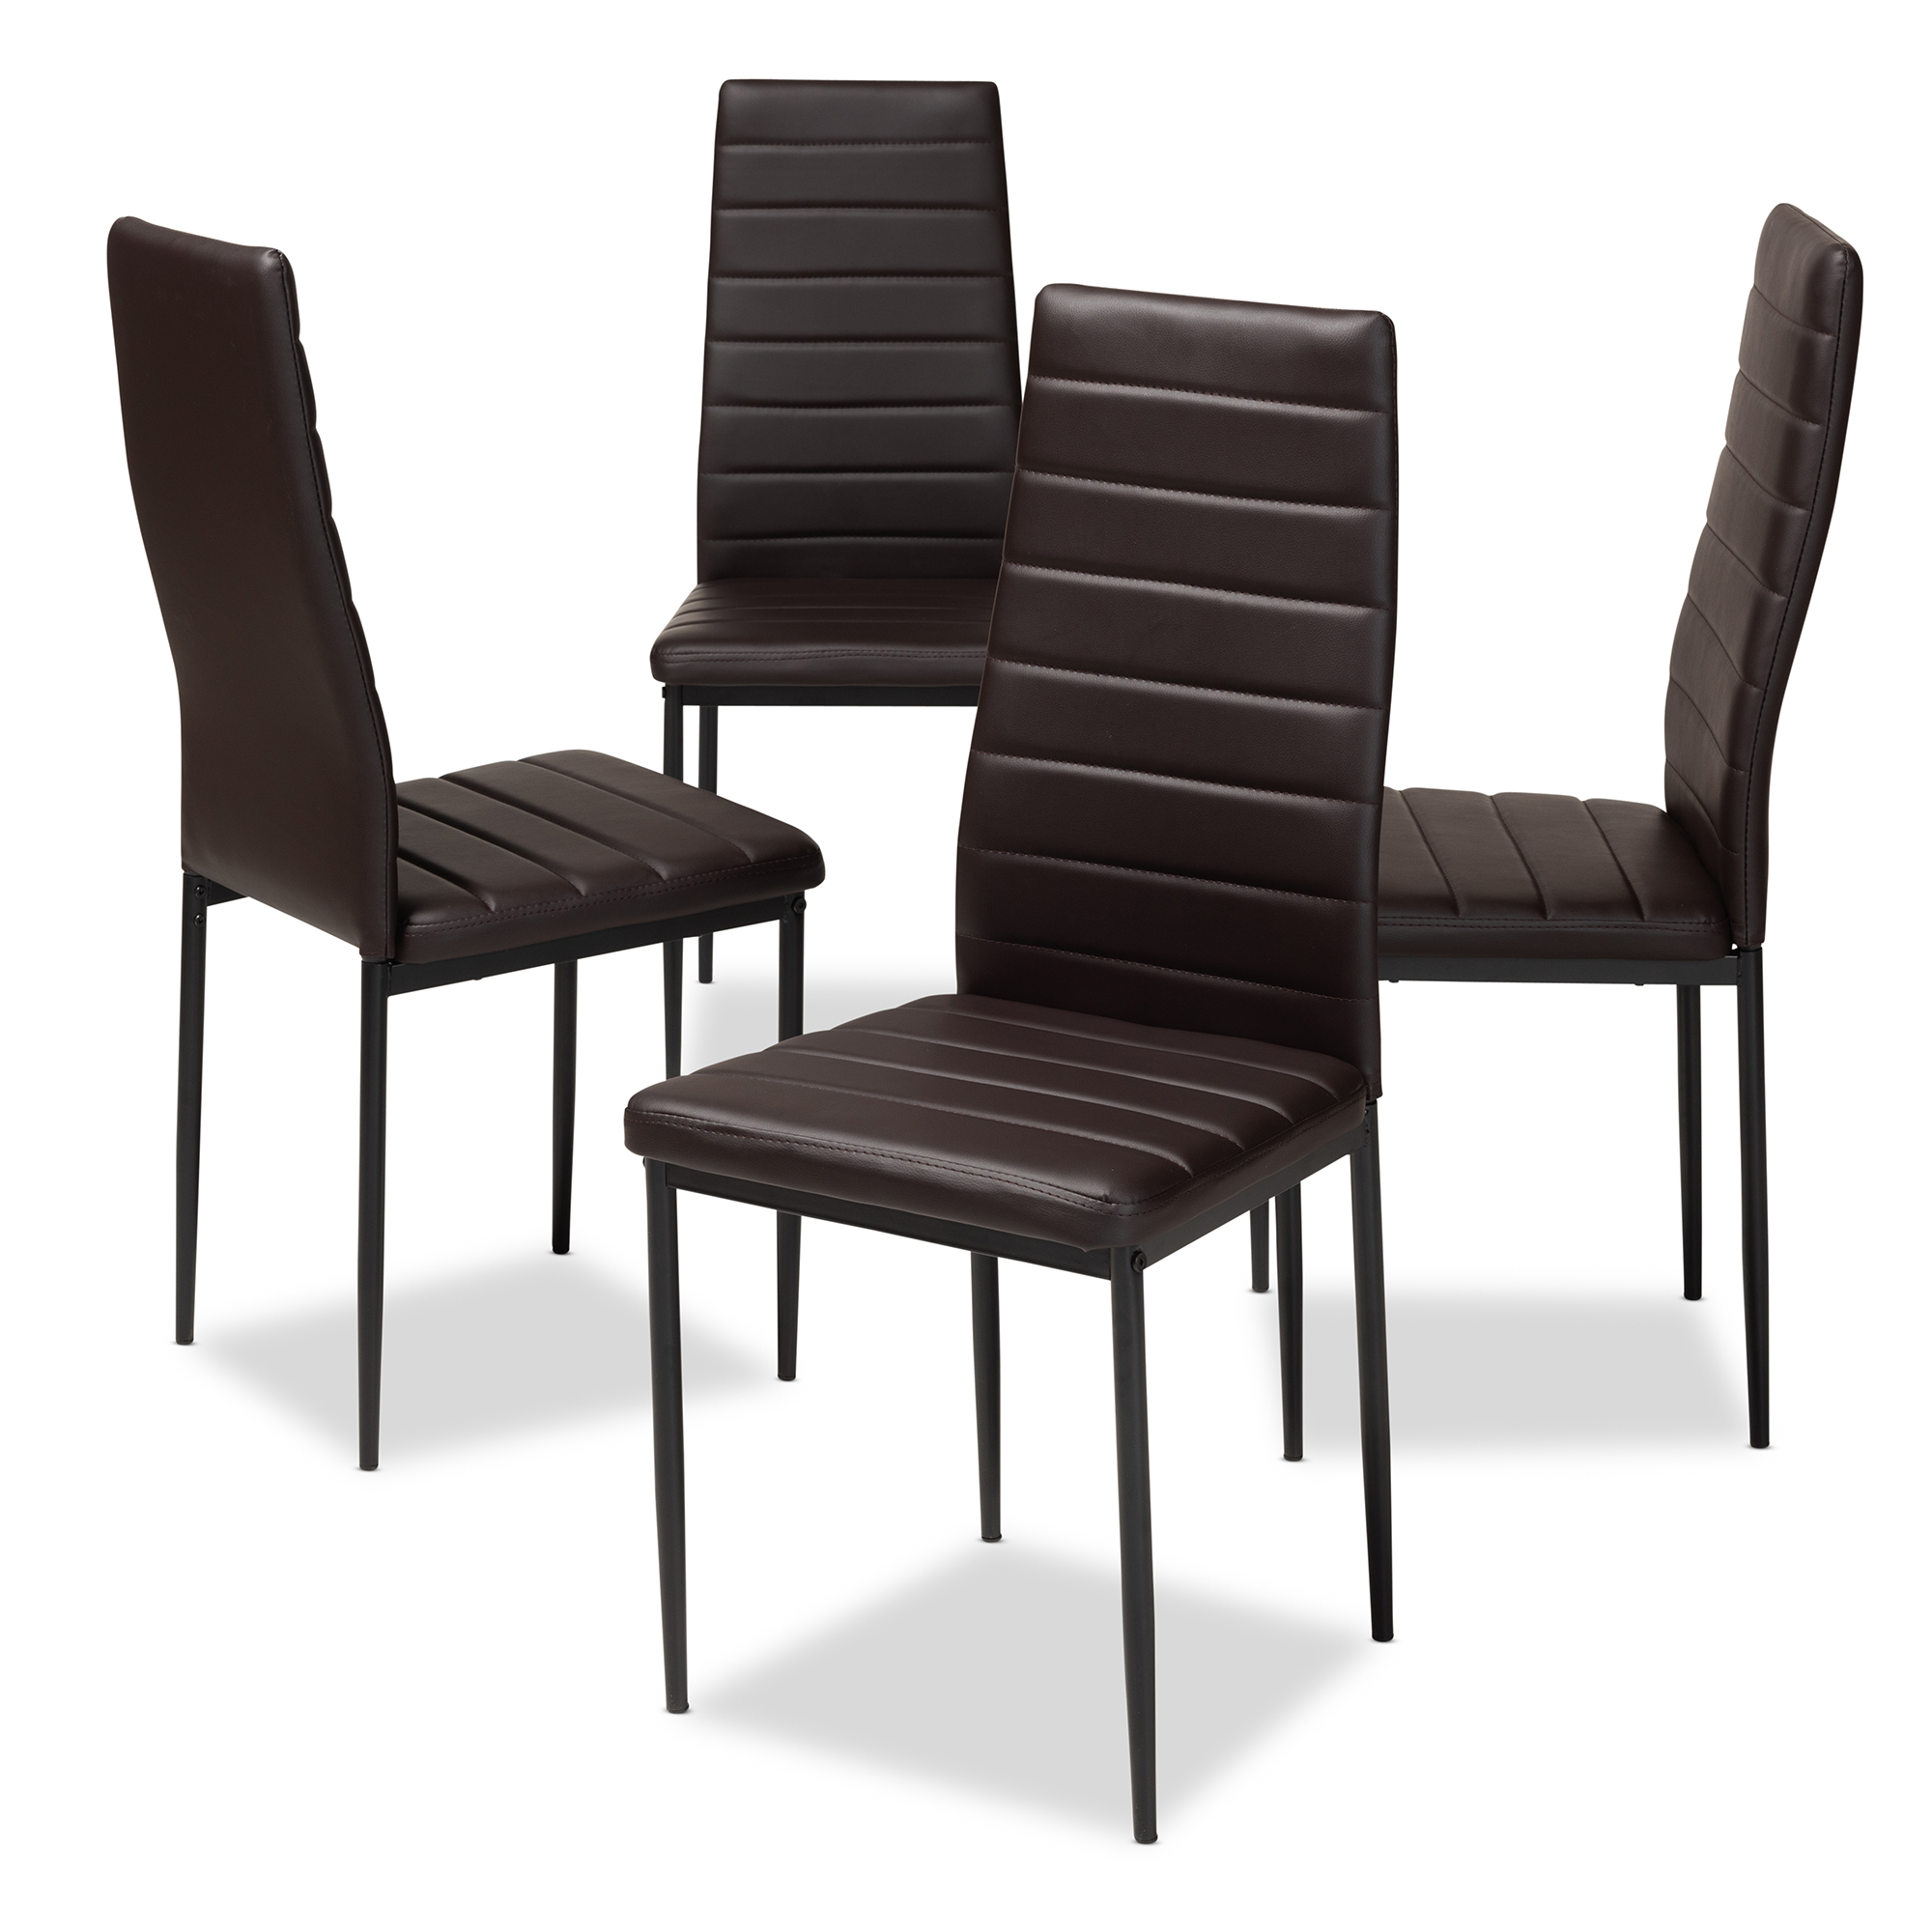 Baxton Studio Armand Modern and Contemporary Brown Faux Leather Upholstered Dining Chair (Set of 4)